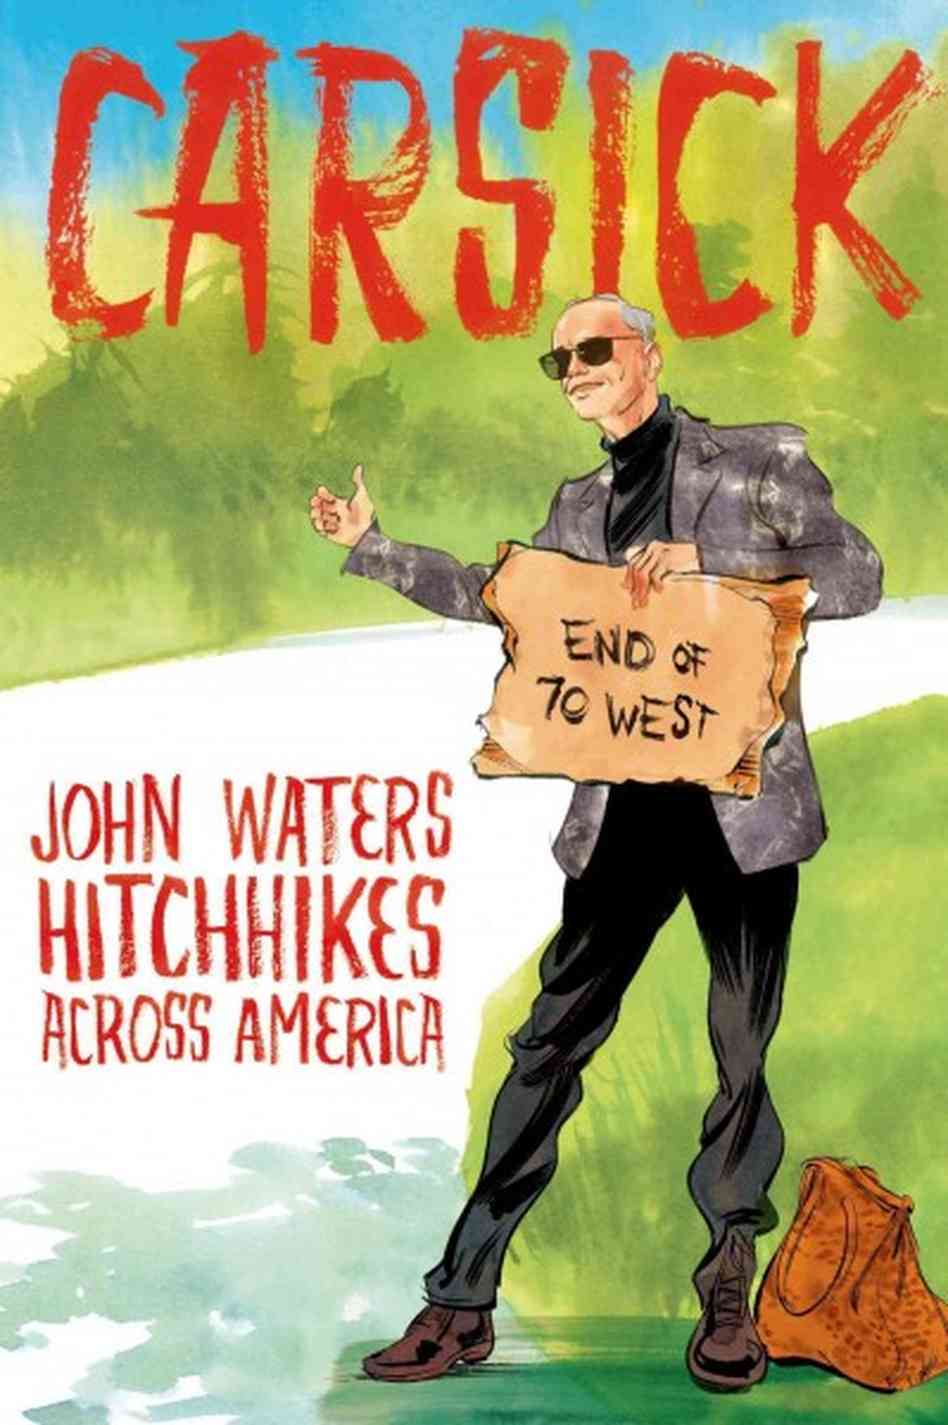 Carsick Cover - John Waters - The Clothesline